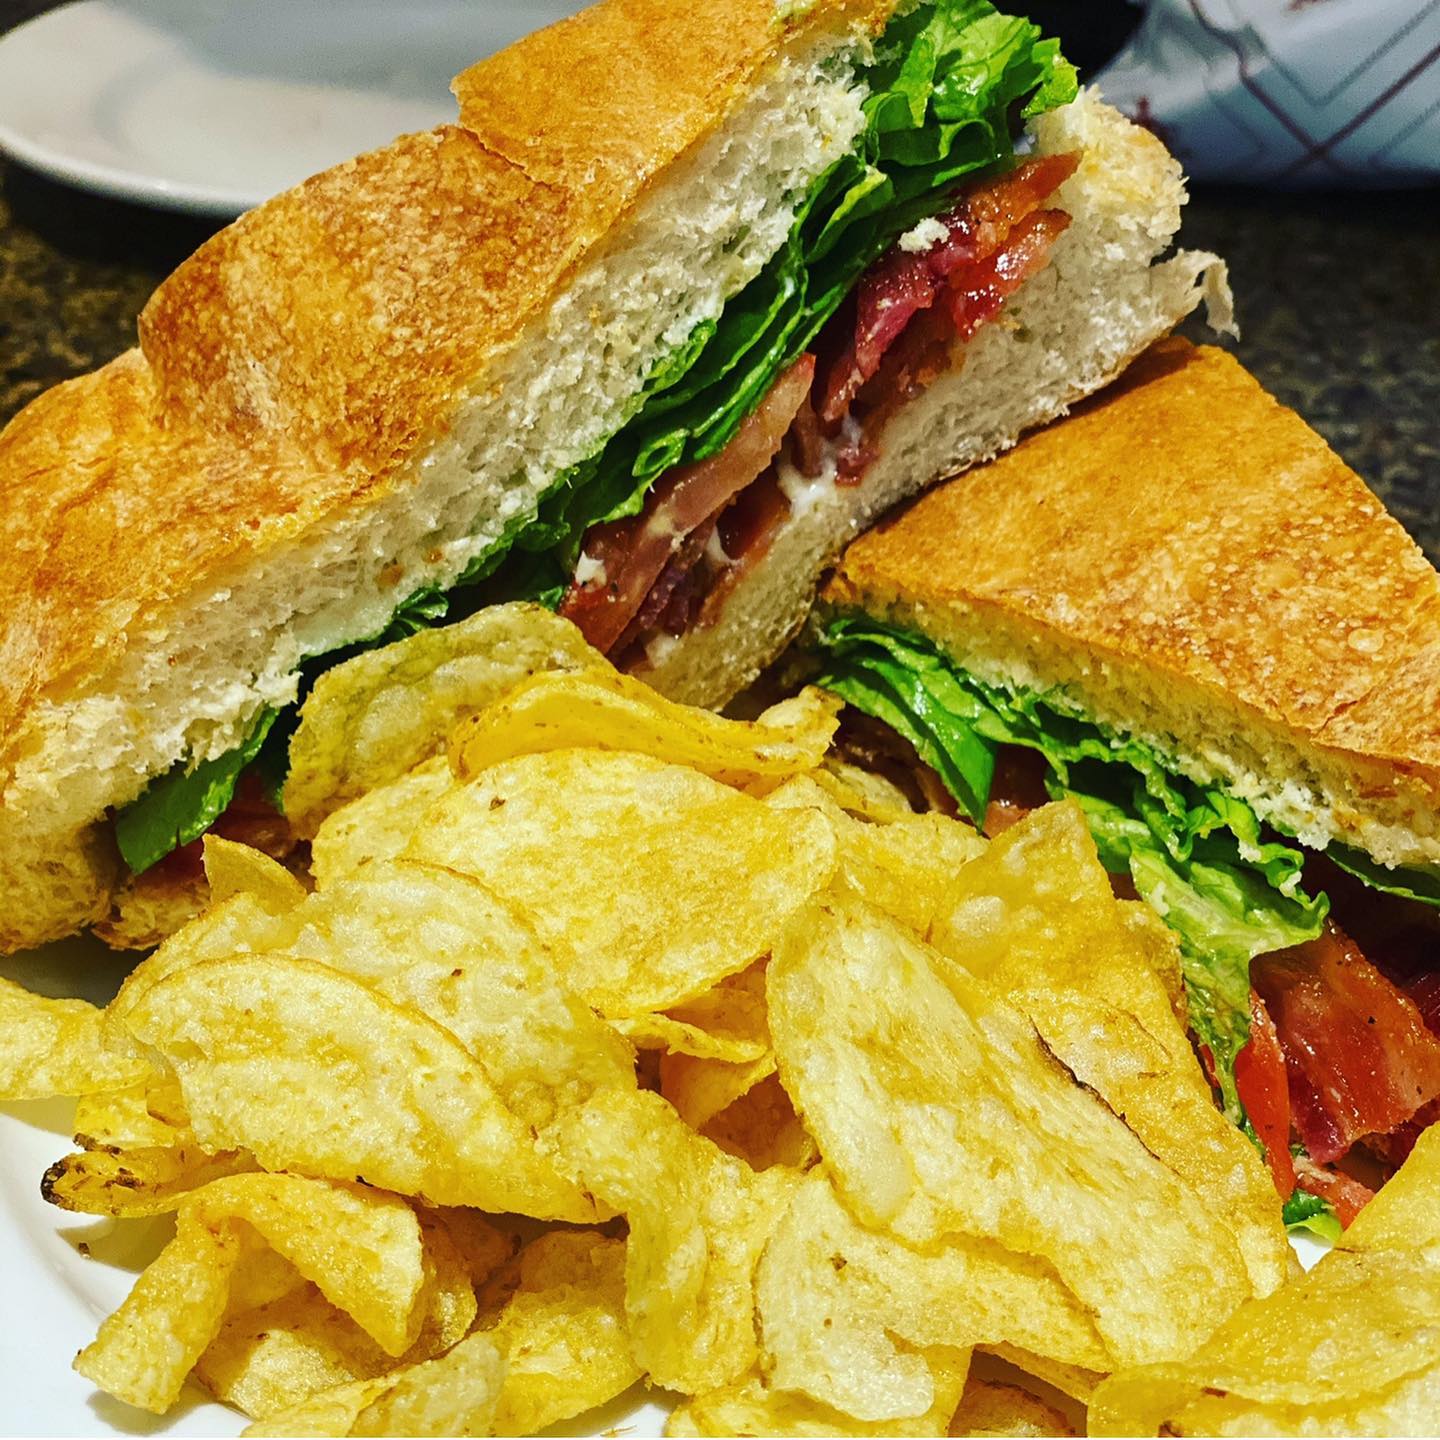 BLT on focaccia bread with potato chips